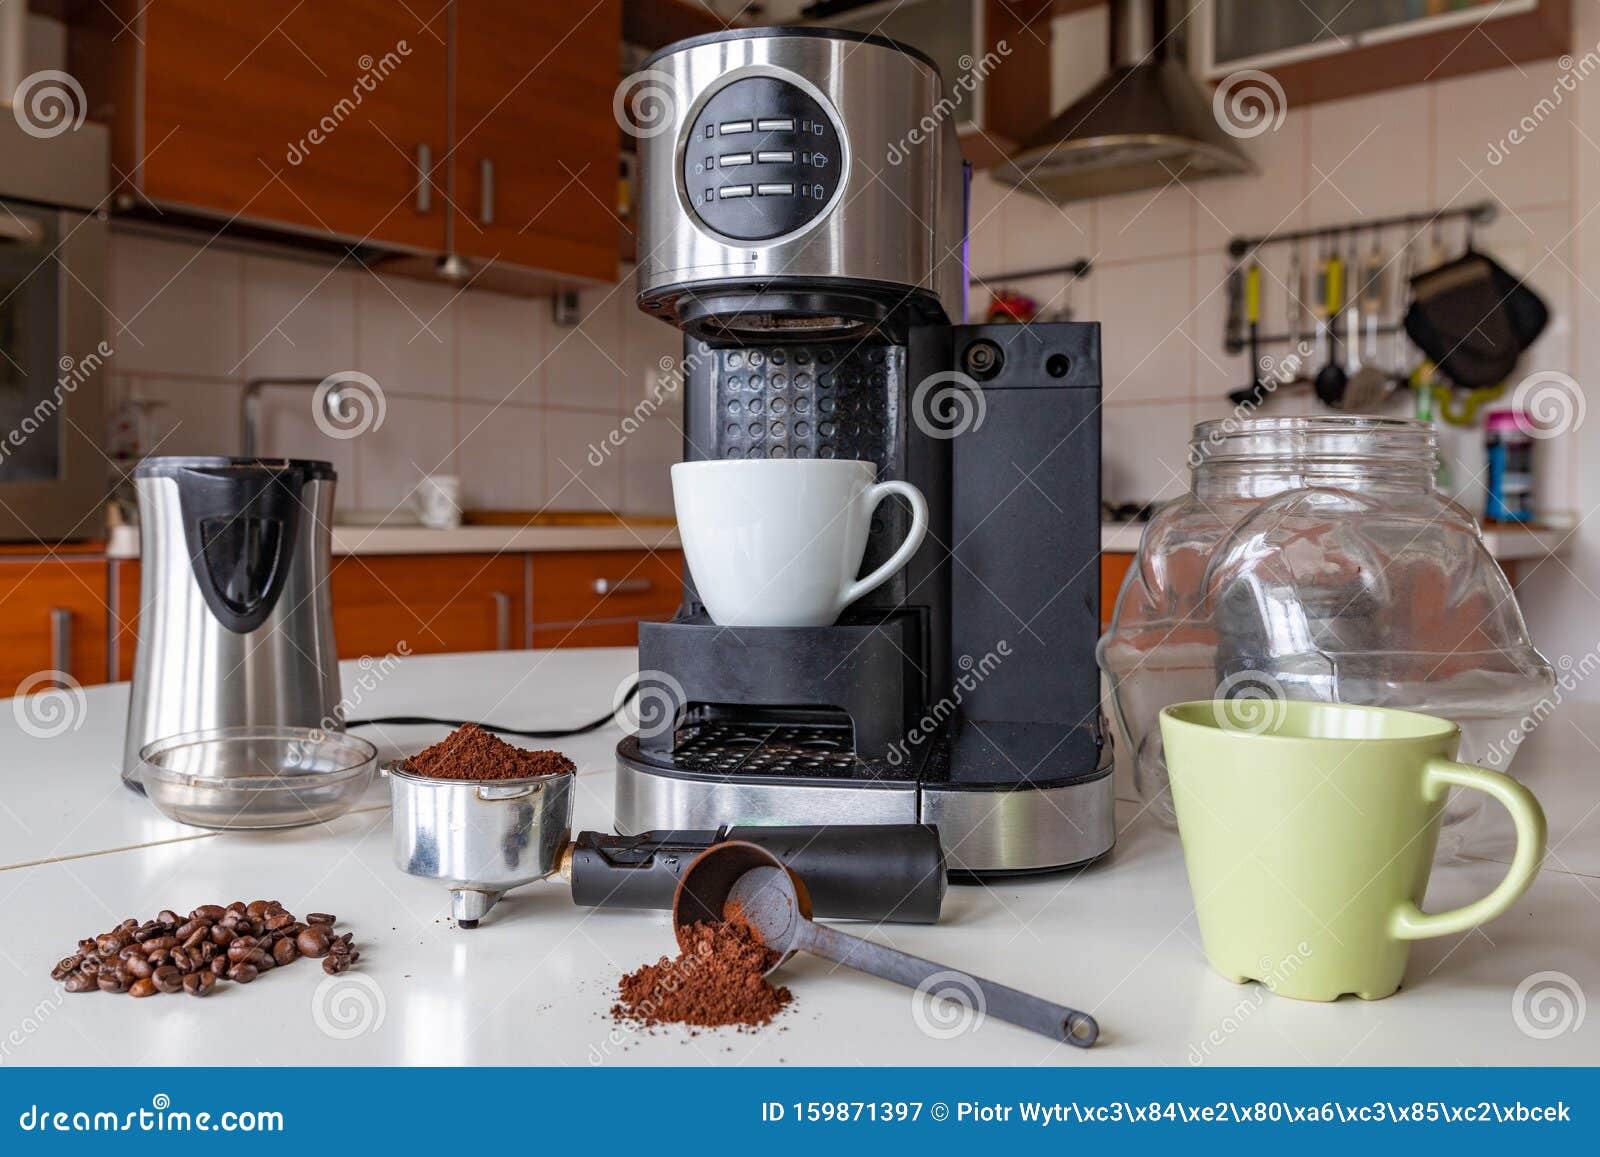 https://thumbs.dreamstime.com/z/making-tasty-coffee-home-kitchen-coffee-maker-accessories-needed-to-prepare-making-tasty-coffee-home-kitchen-159871397.jpg